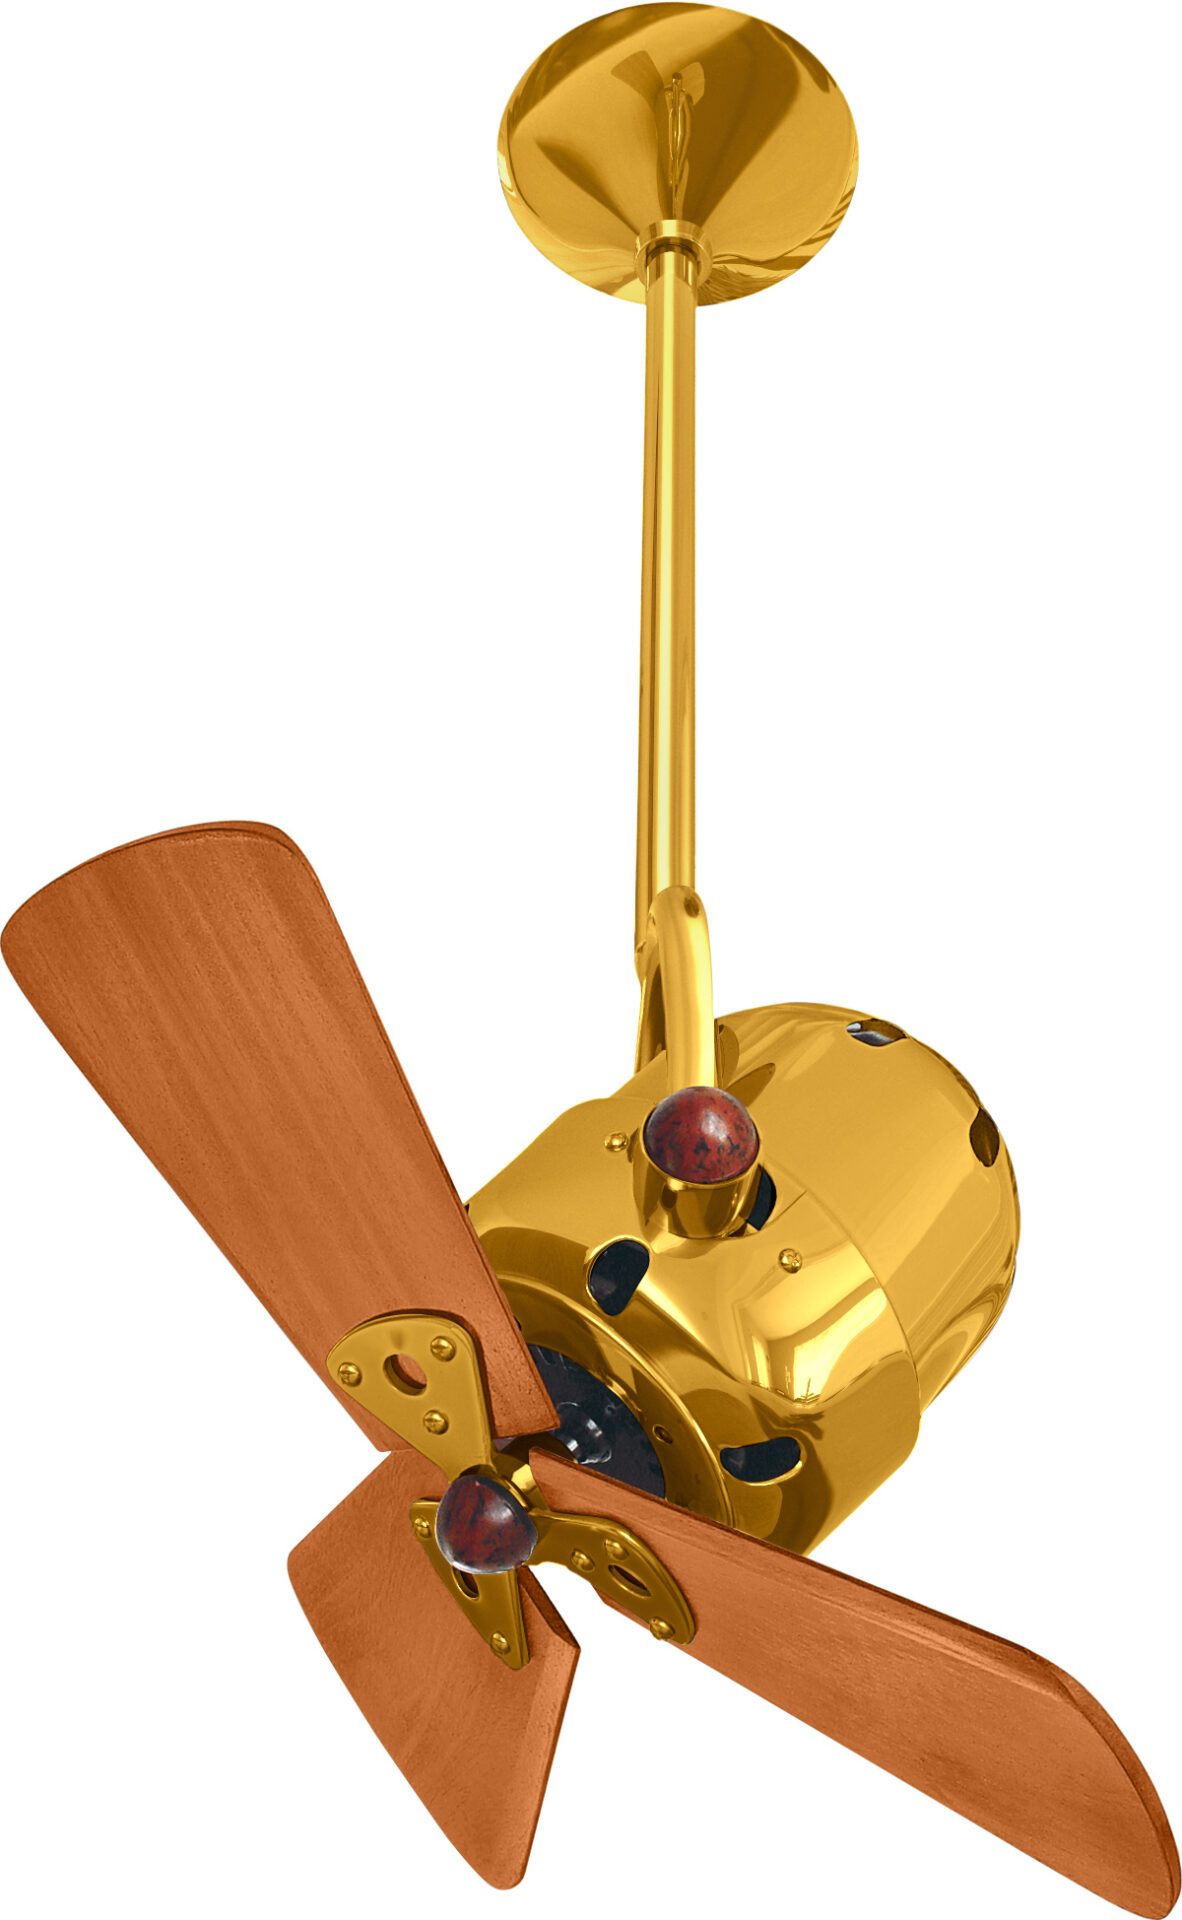 Bianca Direcional ceiling fan in Gold / Ouro with mahogany wood blades by Matthews Fan Company.